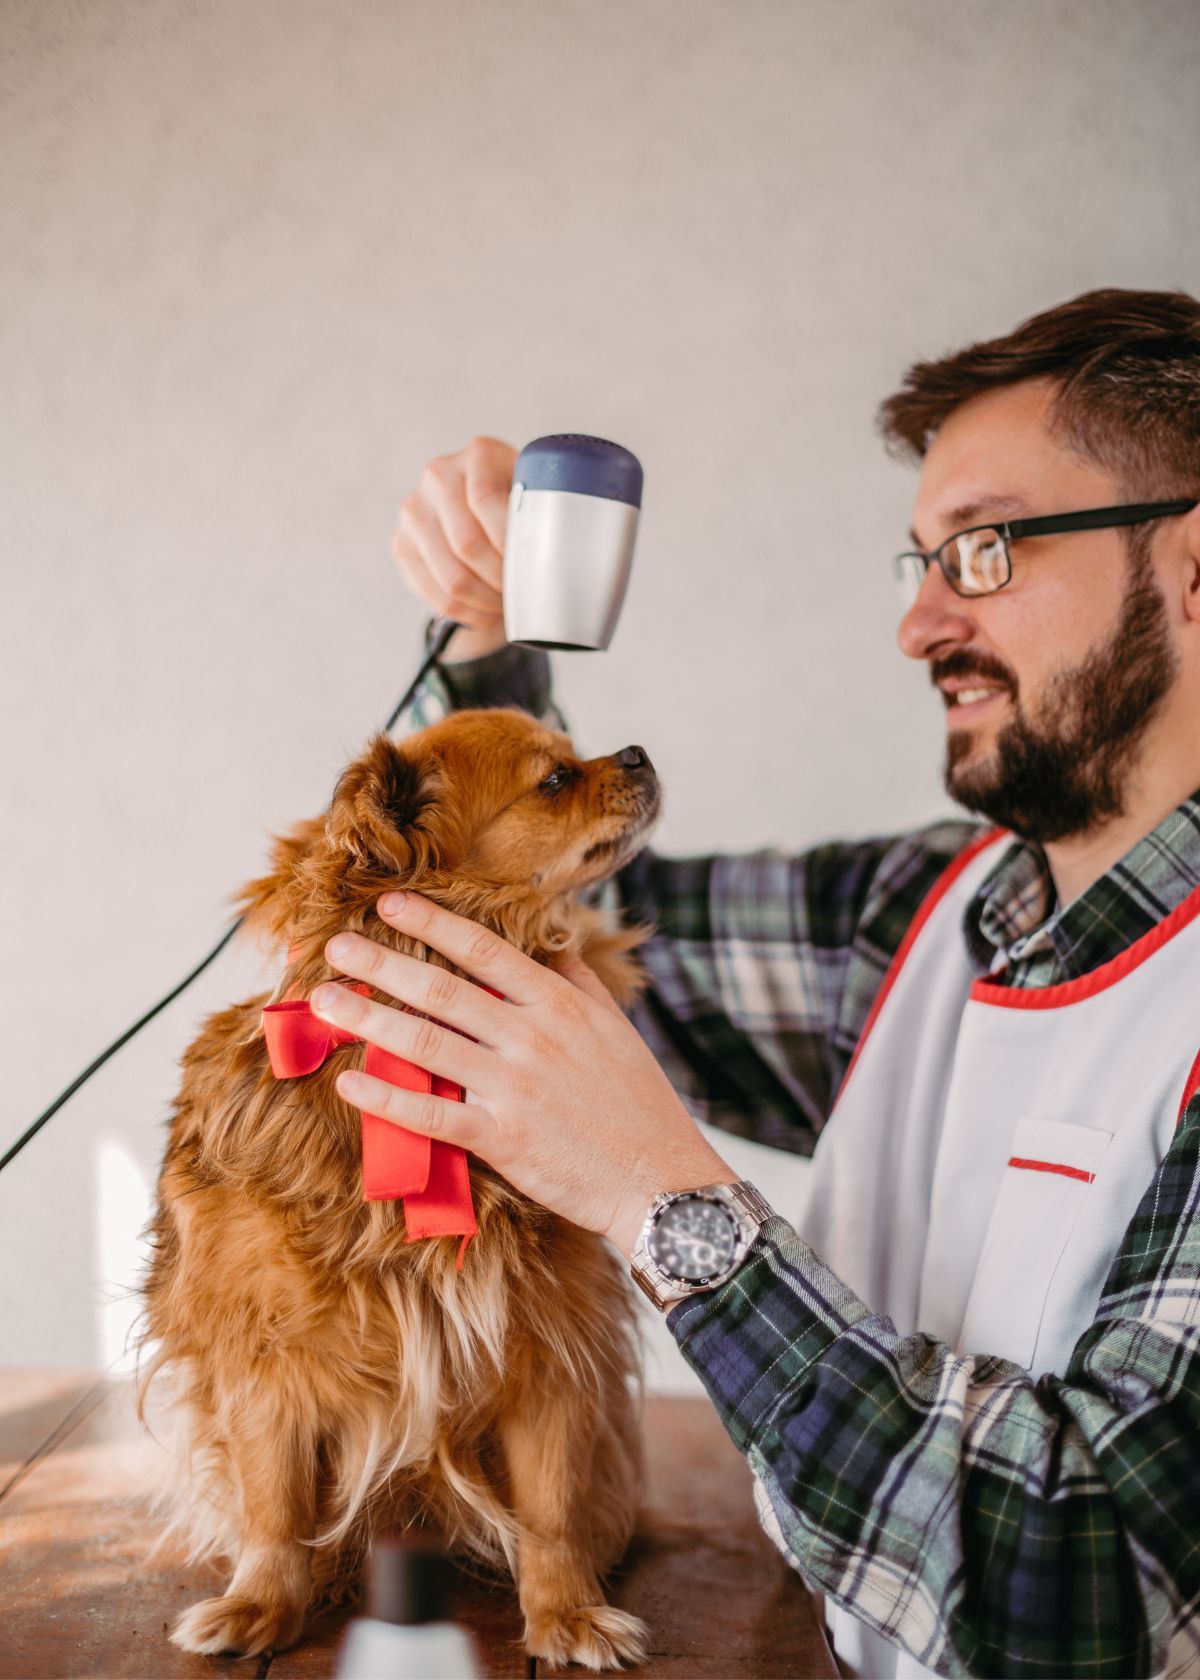 7 Best Dog Hair Dryer On The Market: Buyer's Guide